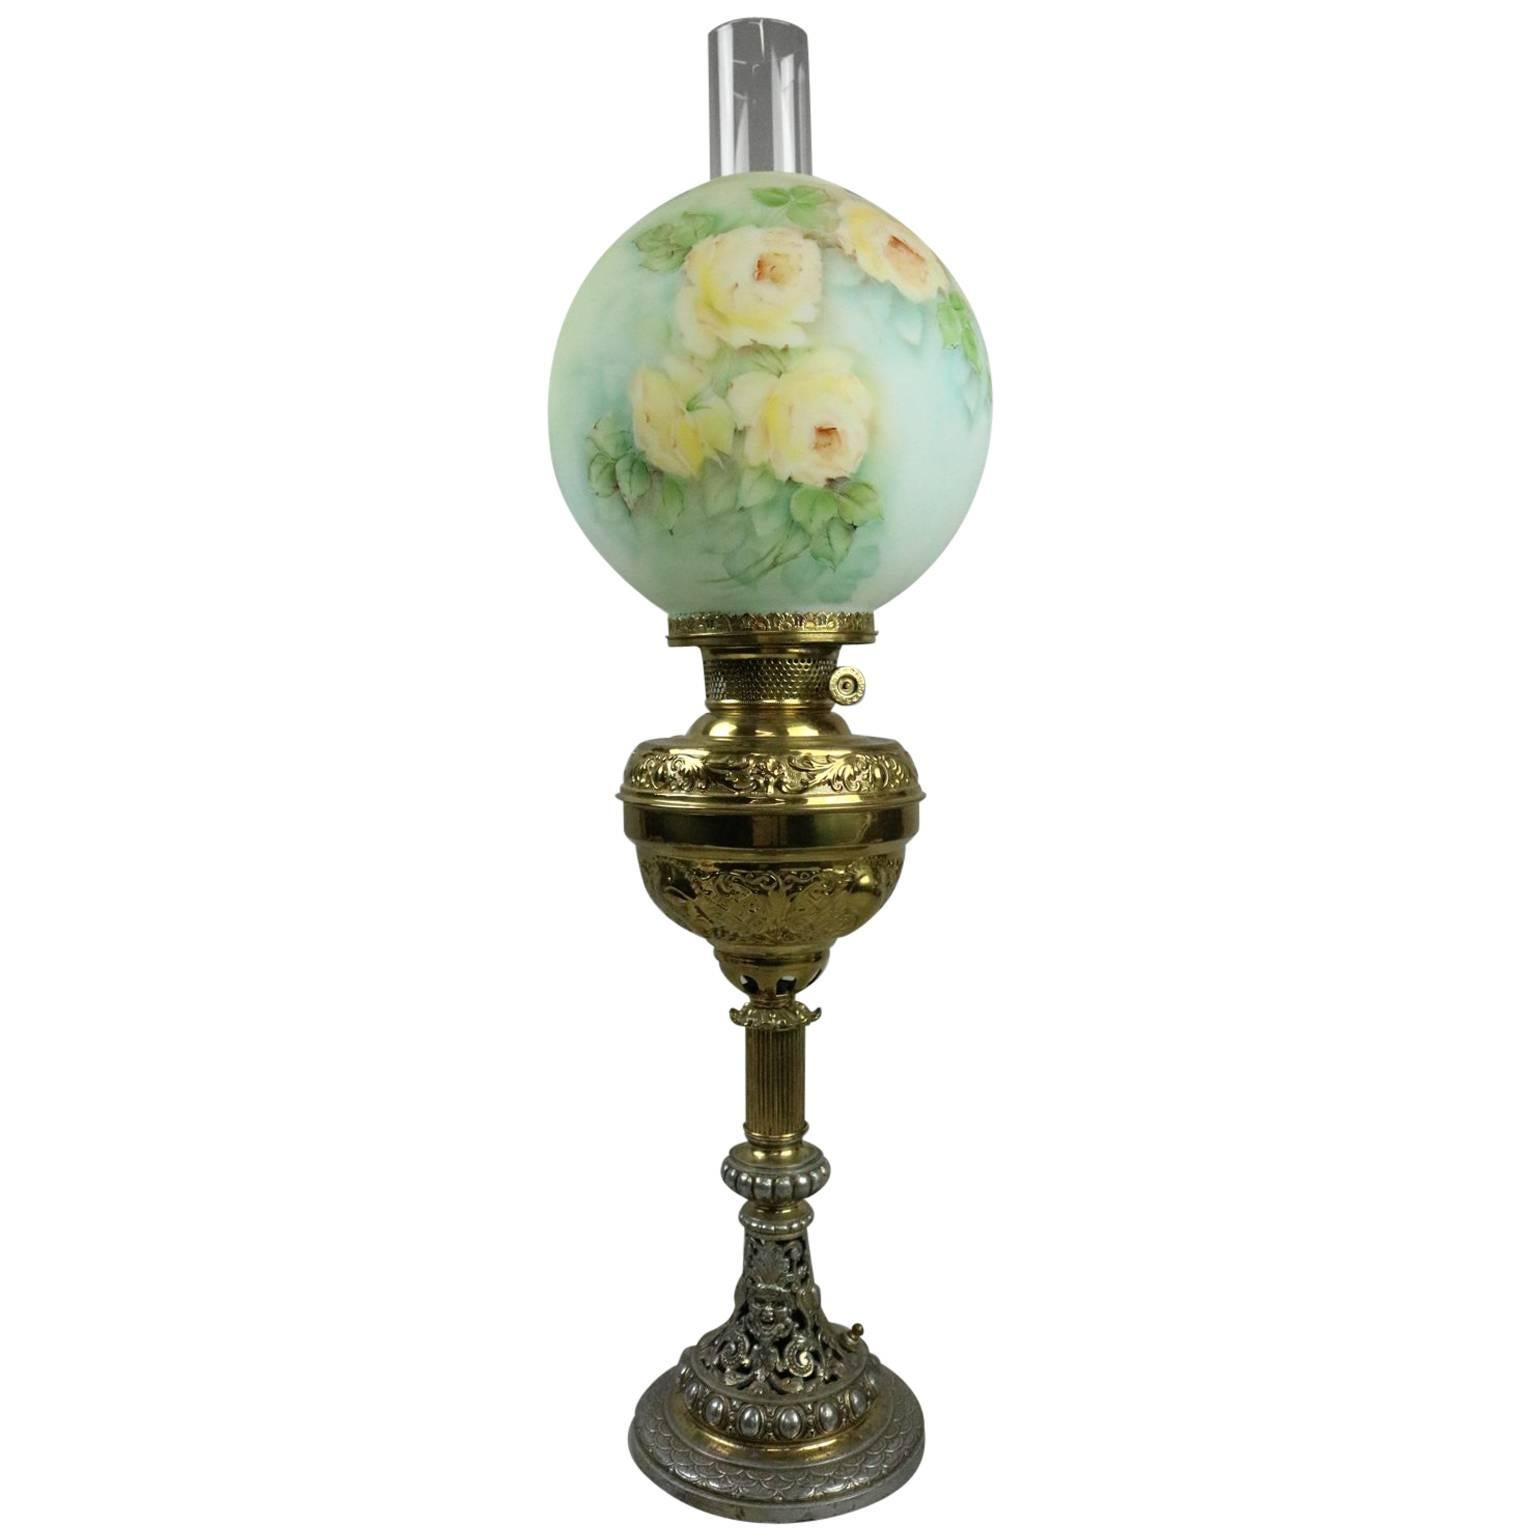 Antique Rochester Lamp Co. Parlor Lamp with Hand-Painted Rose Shade, circa 1880